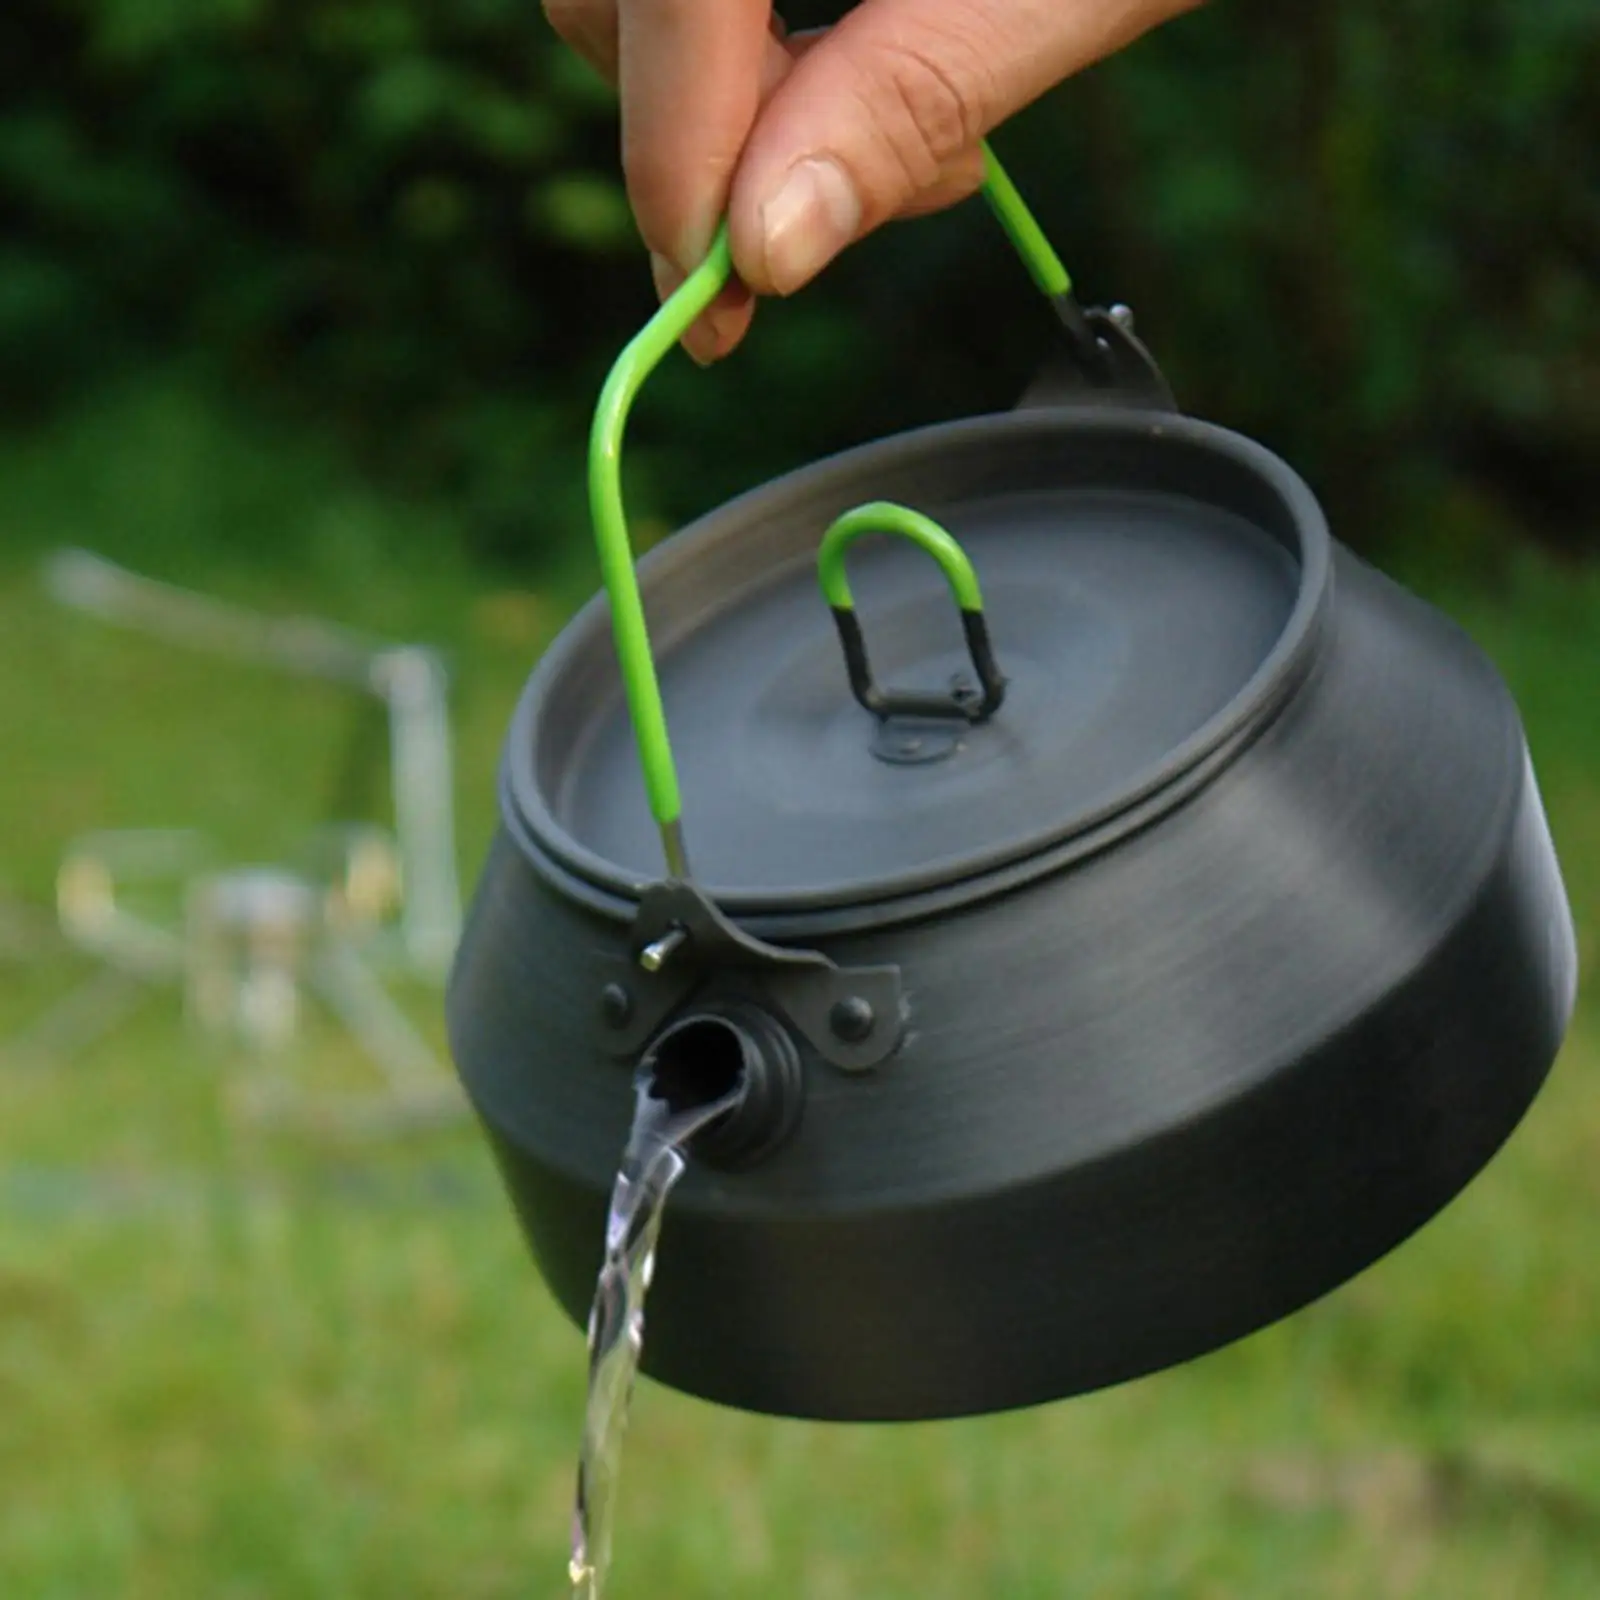 800ml Camping Kettle for Boiling Water Picnic Cooking Supplies Coffee Tea Pot Hiking Equipment Travel Outdoor Ultralight